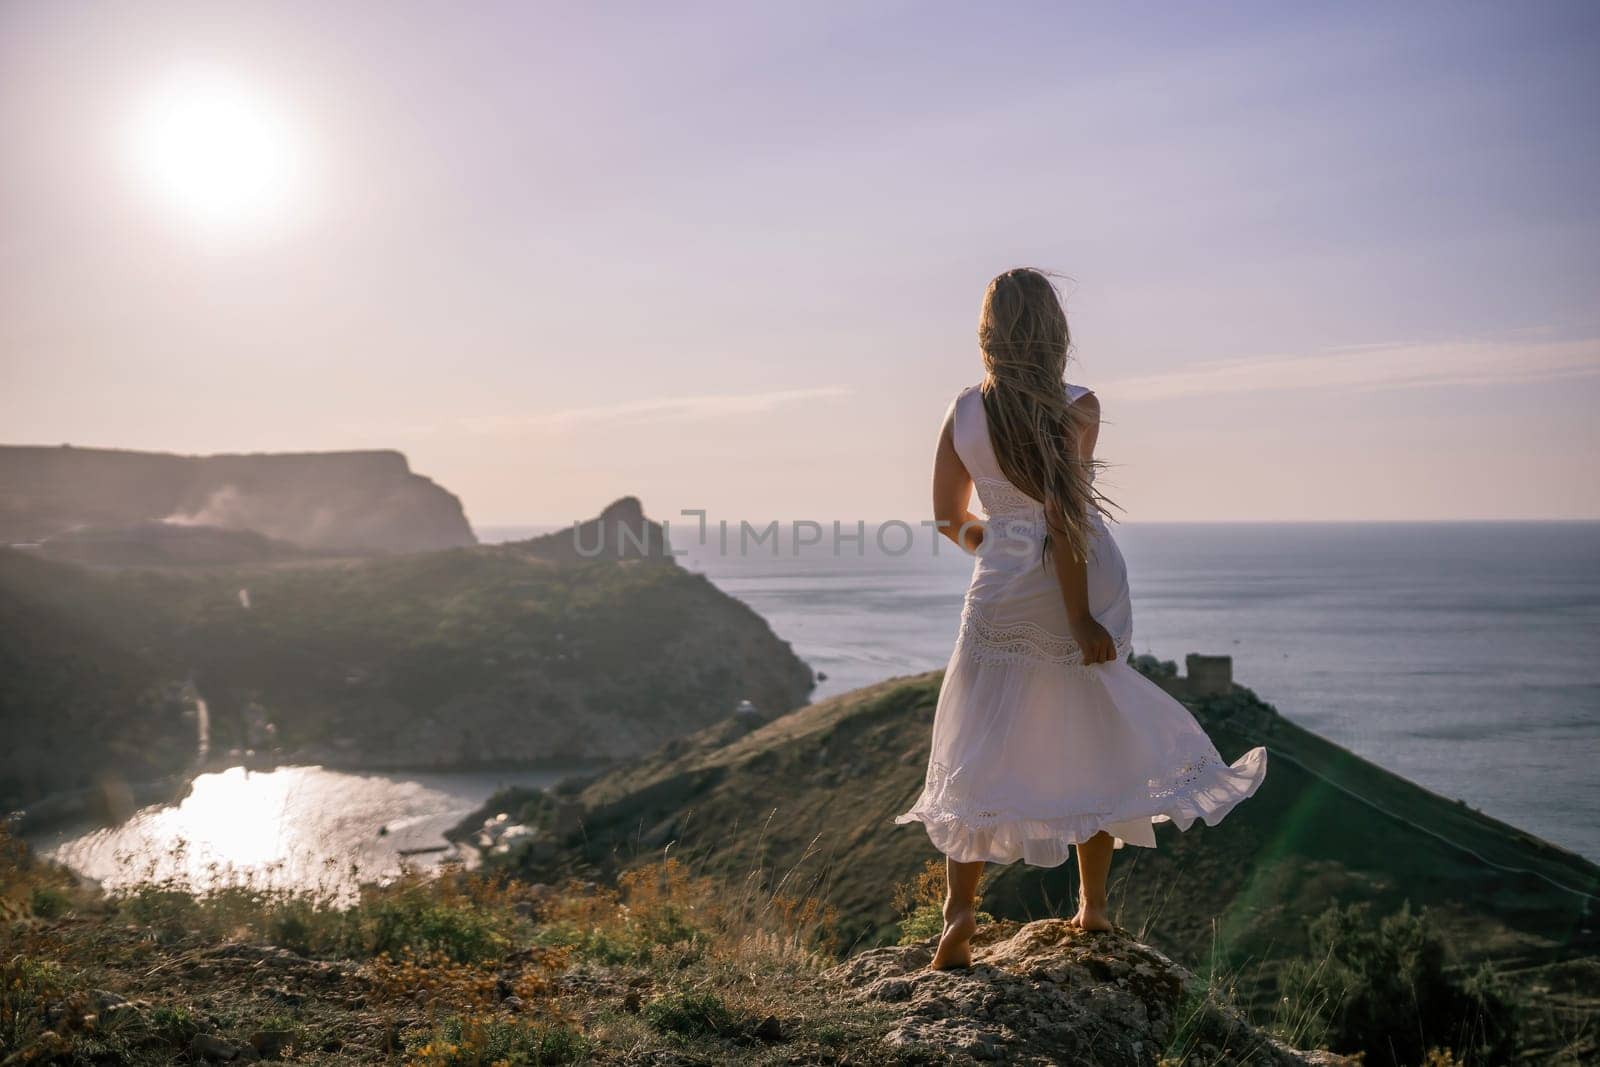 A woman in a white dress stands on a hill overlooking the ocean. The scene is serene and peaceful, with the woman's dress billowing in the wind. The combination of the ocean